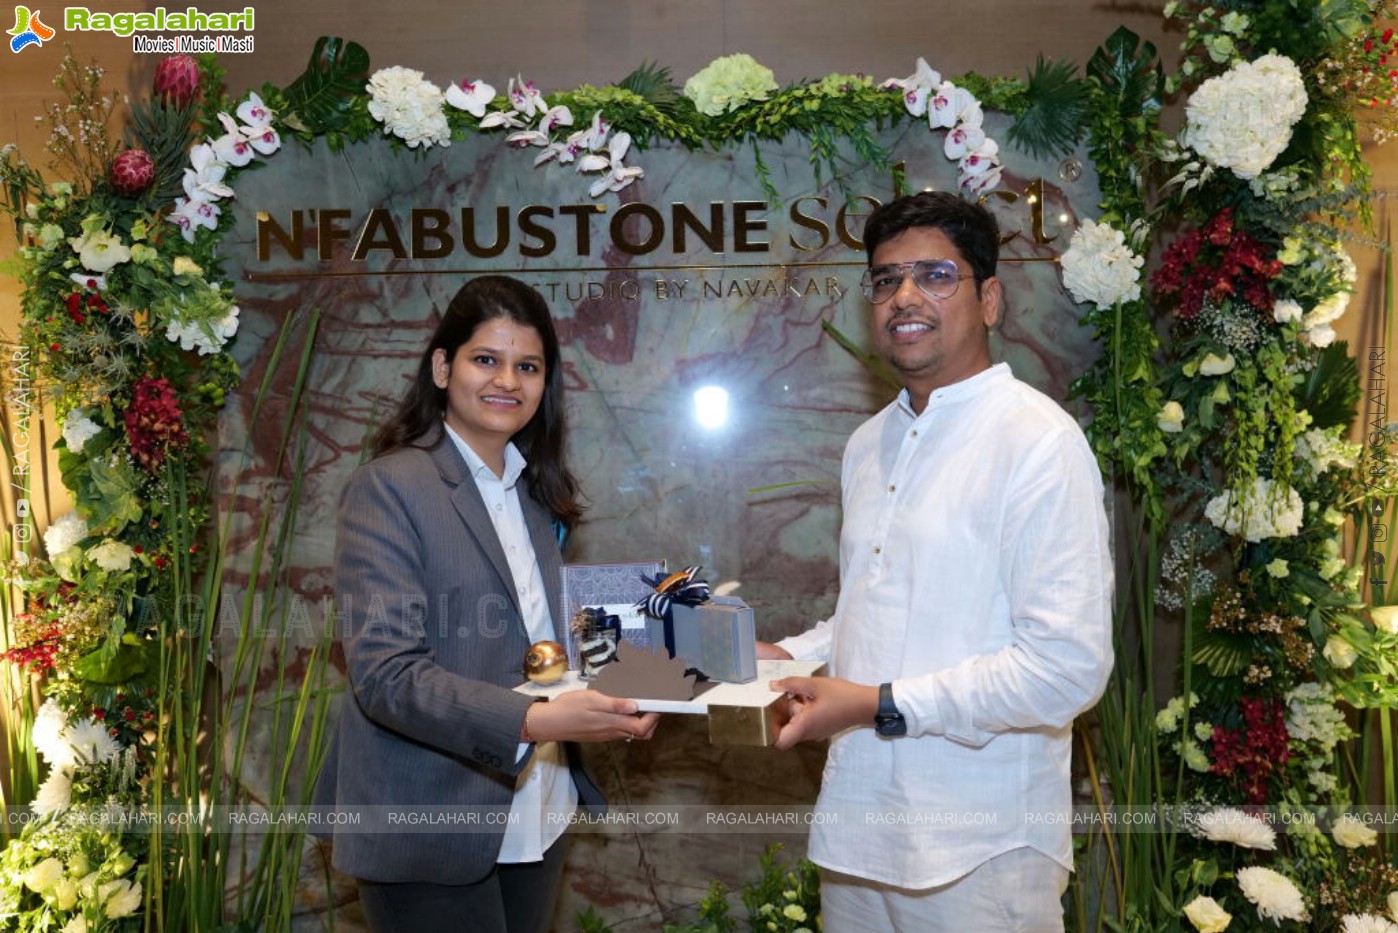 Grand Opening Ceremony of N’Fabustone Select, Hyderabad